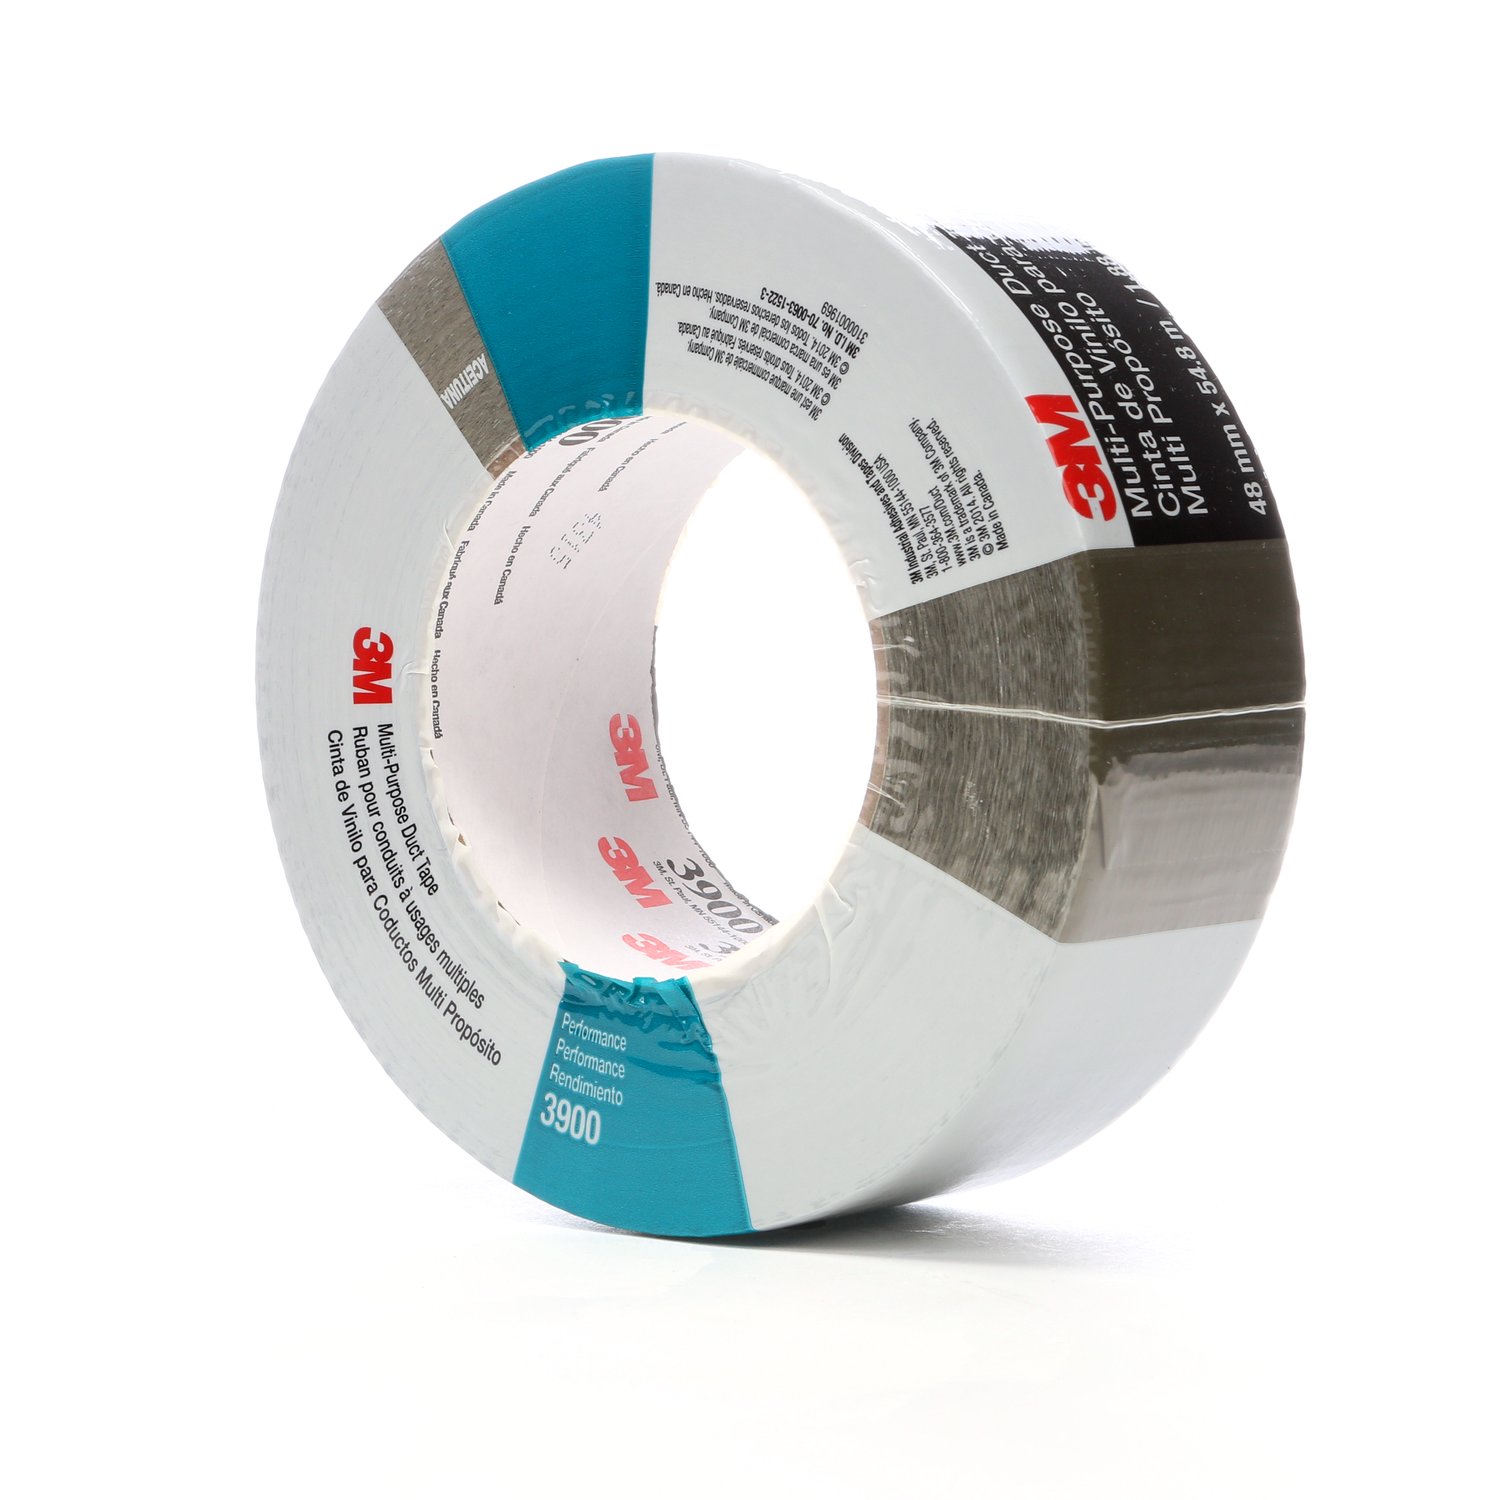 3M 3903 White Vinyl Rubber Adhesive Duct Tape - 2 in. x 150 ft